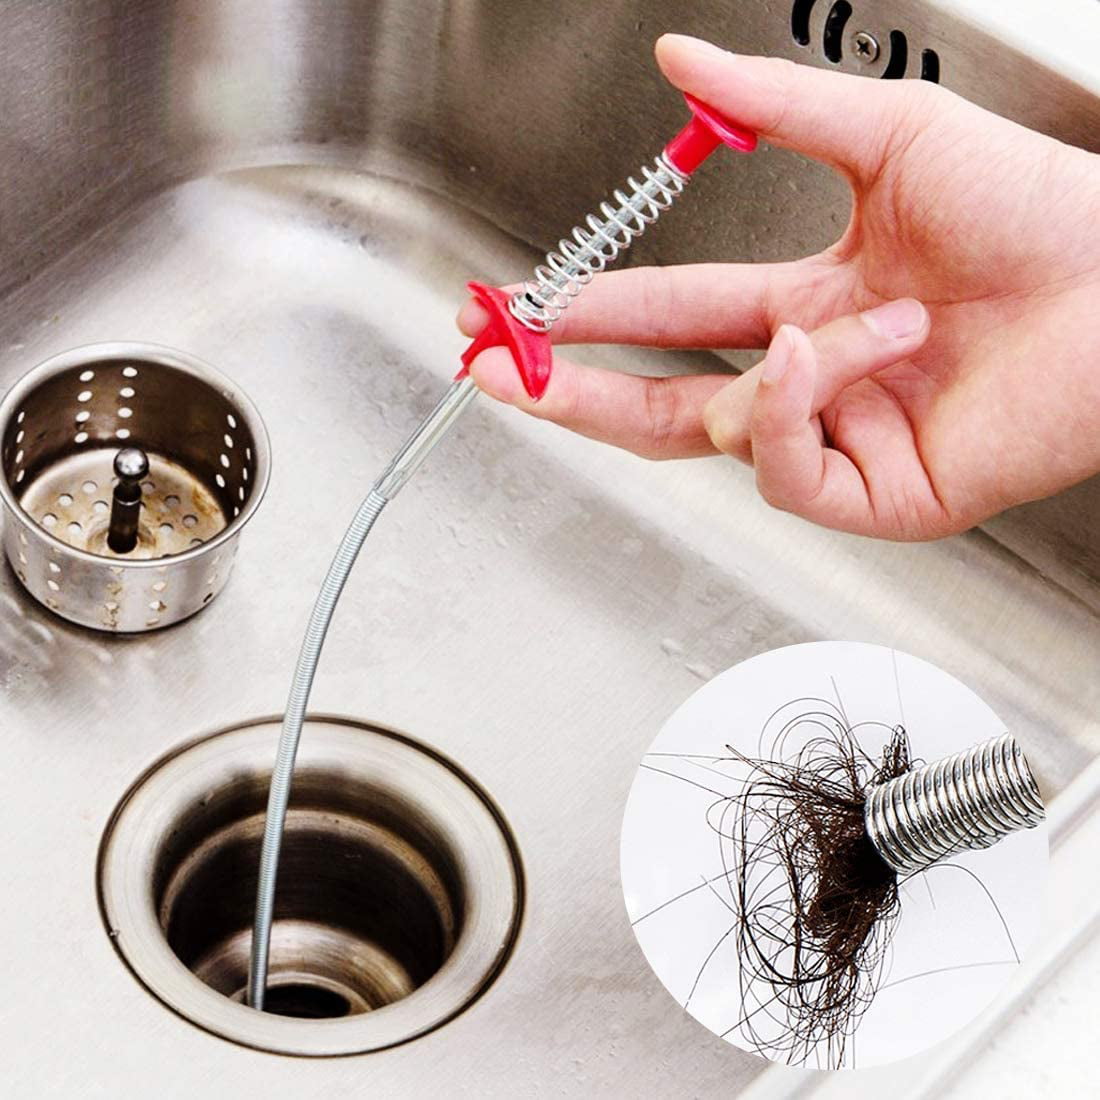 6pcs Hair Snake Tool Drain Opener Hair Clog Remover Sink Snake for Sewer Kitchen Sink Bathroom Tub Toilet Clogged Drains Relief Cleaning Tool, Size